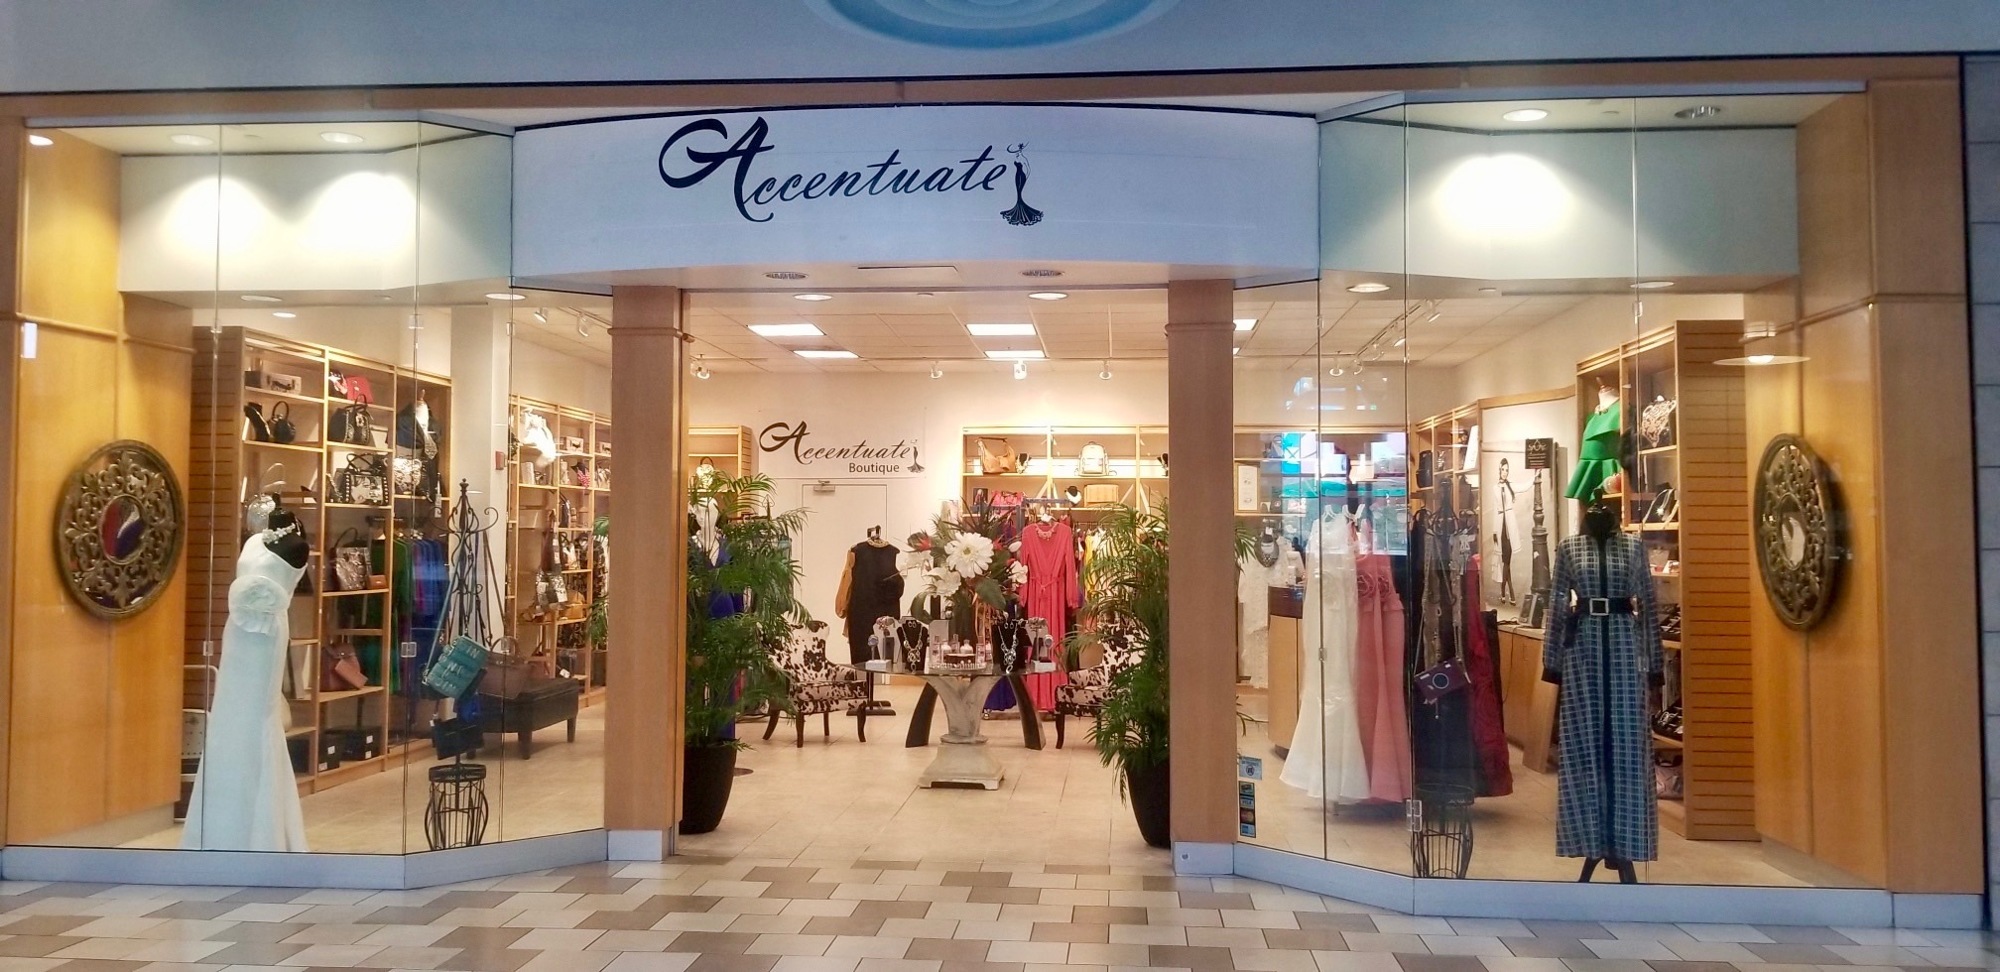 Accentuate Boutique is located adjacent to the food court inside Regency Square Mall. 